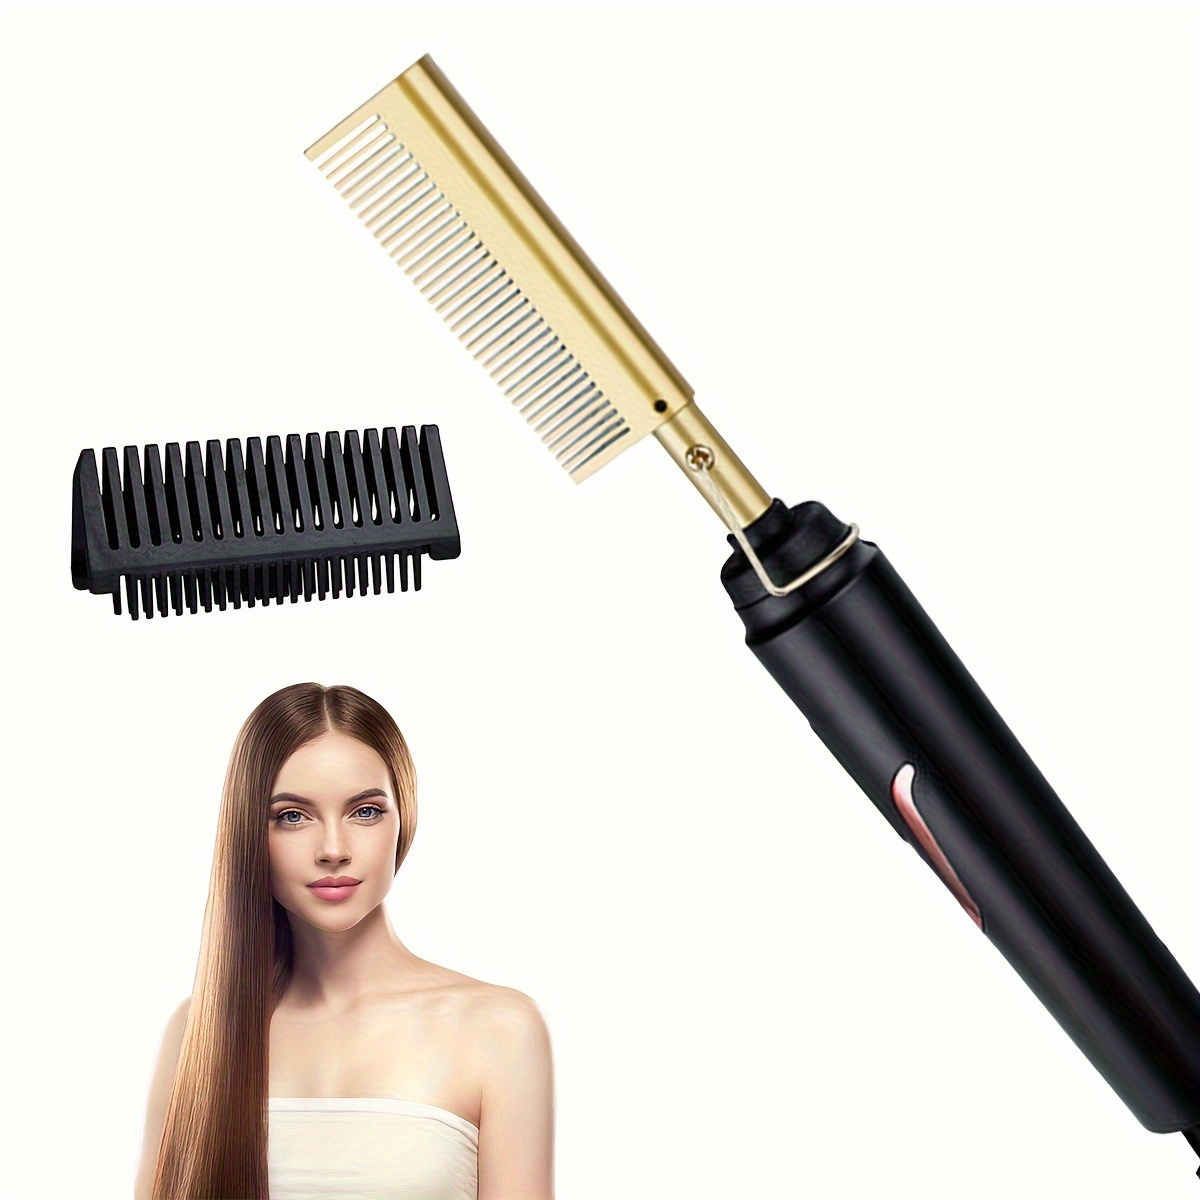  Canbrake 5-in-1 Hair Dryer Brush, 1200W, Black, Detachable and  Interchangeable Hair Straightener Curly Hair Comb, Make Hair Smooth, Hot Air  Wrap Brush with Heat Protective Glove : Beauty & Personal